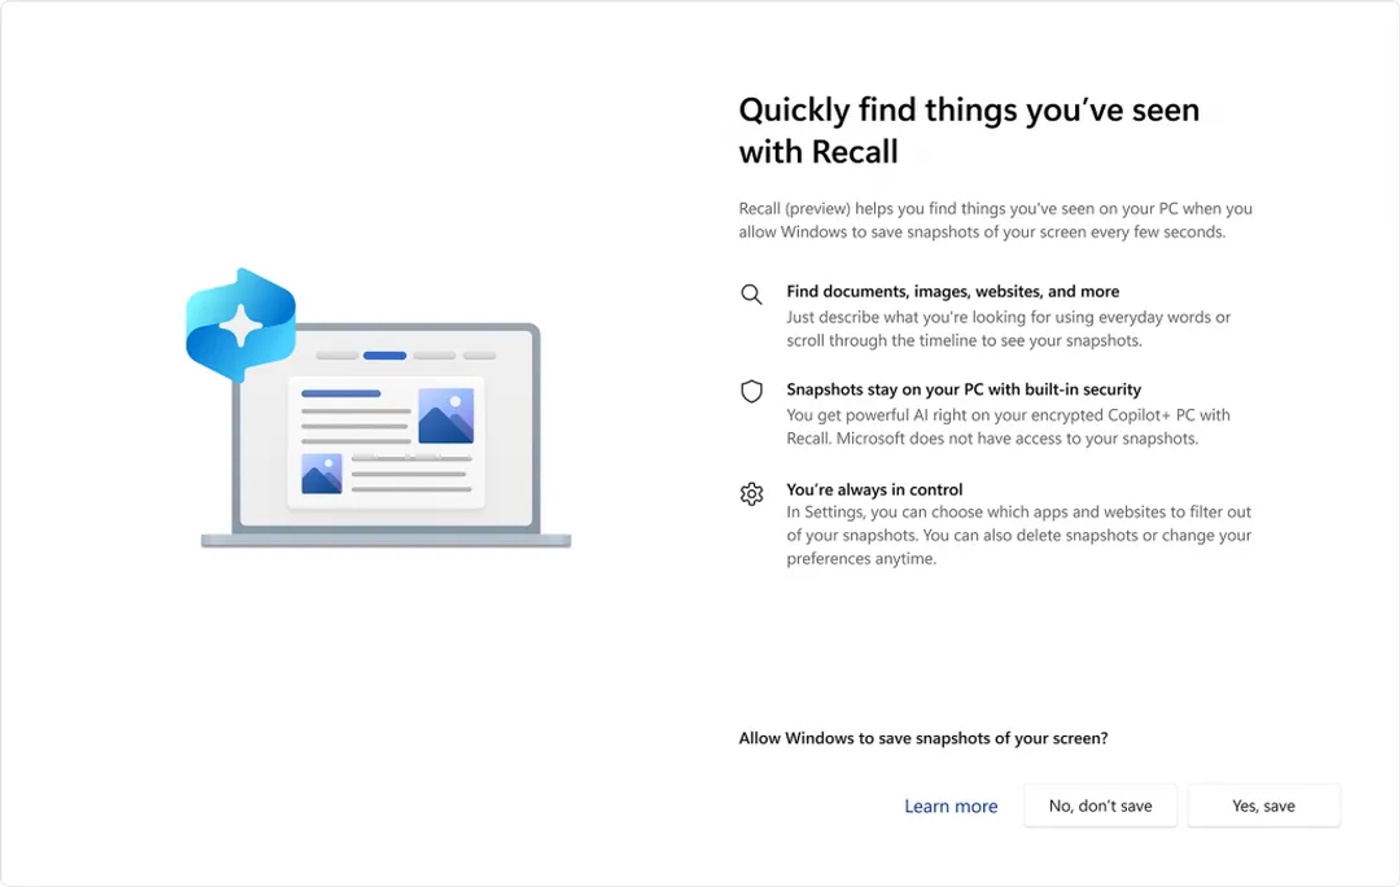 Microsoft Steps Back on Recall Feature Due to Security Concerns